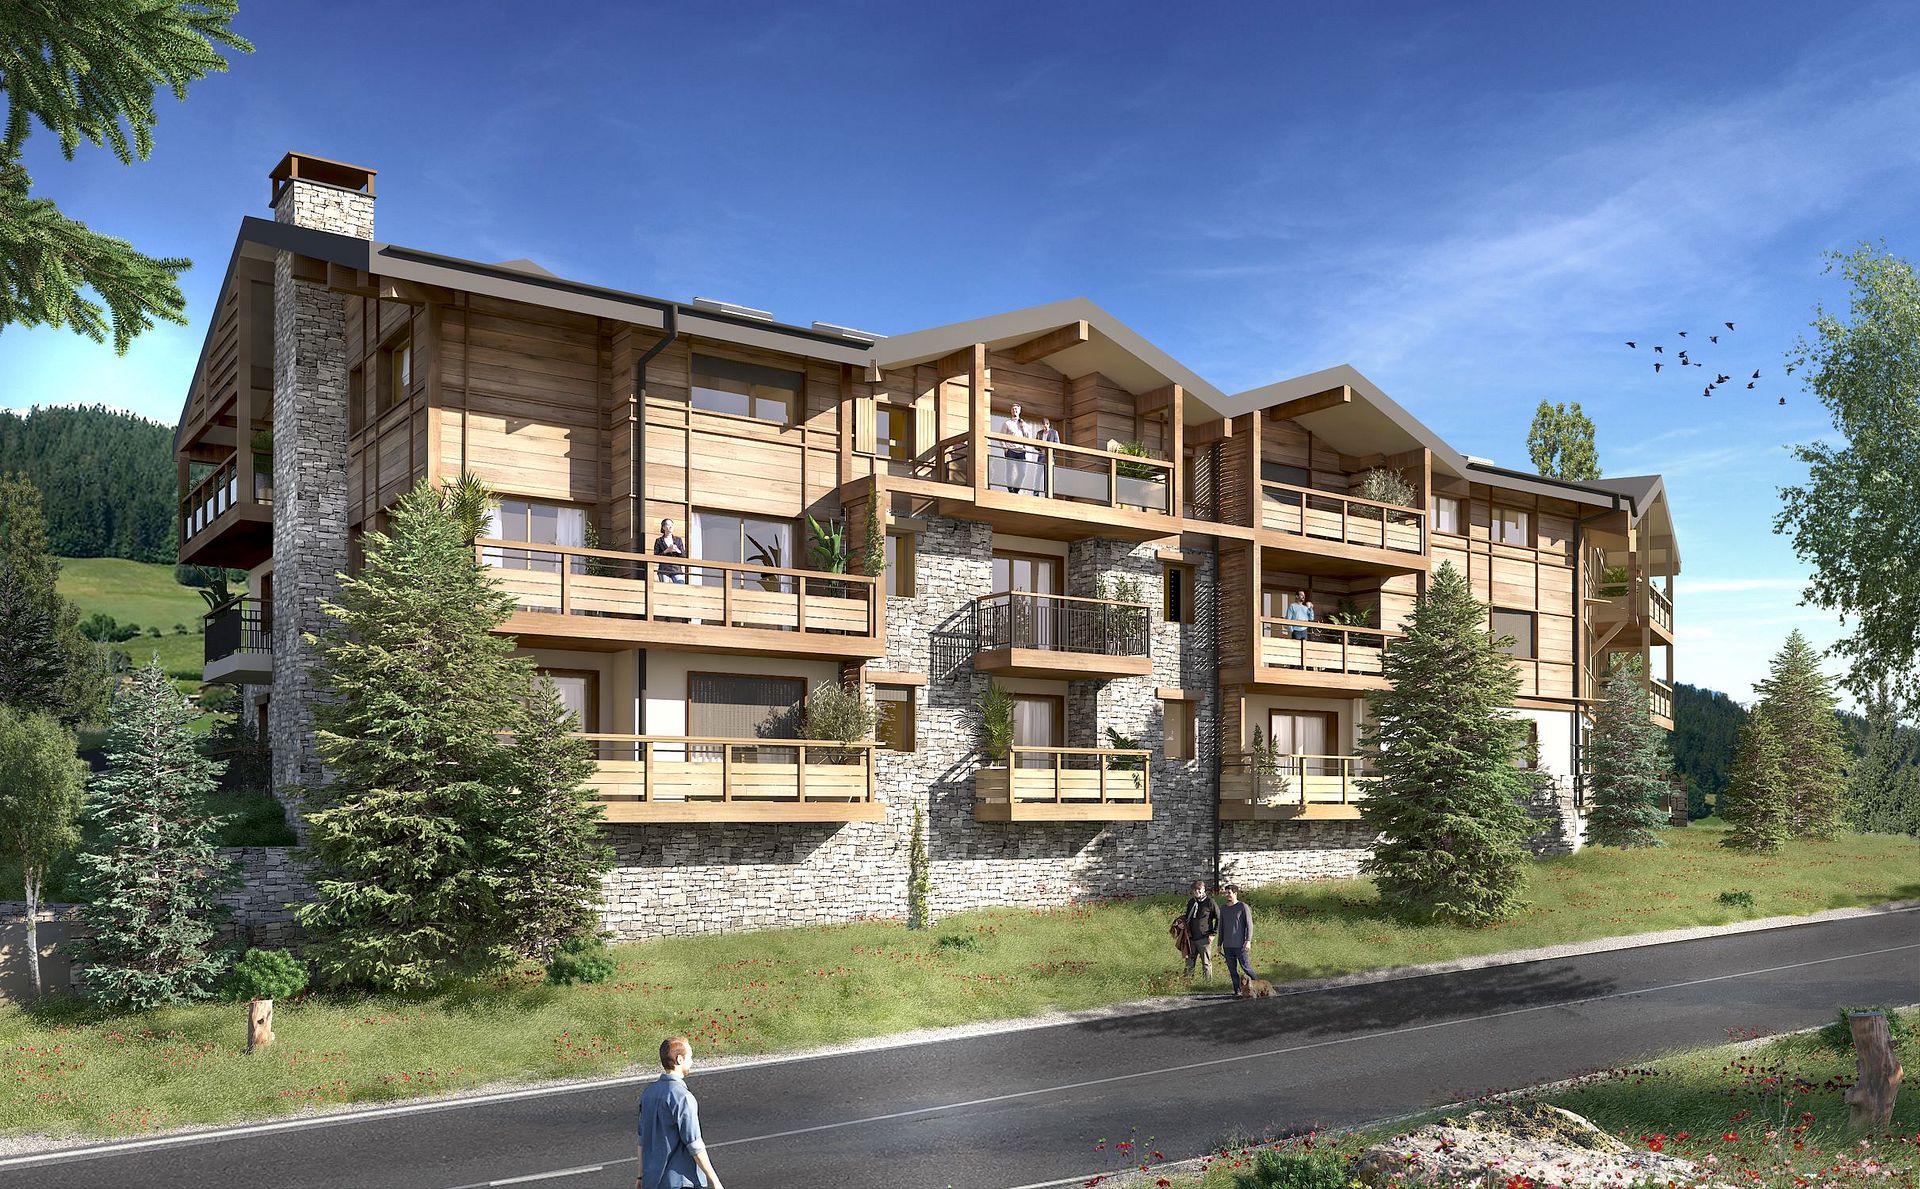 2 bed Penthouse For Sale in Portes du Soleil, French Alps